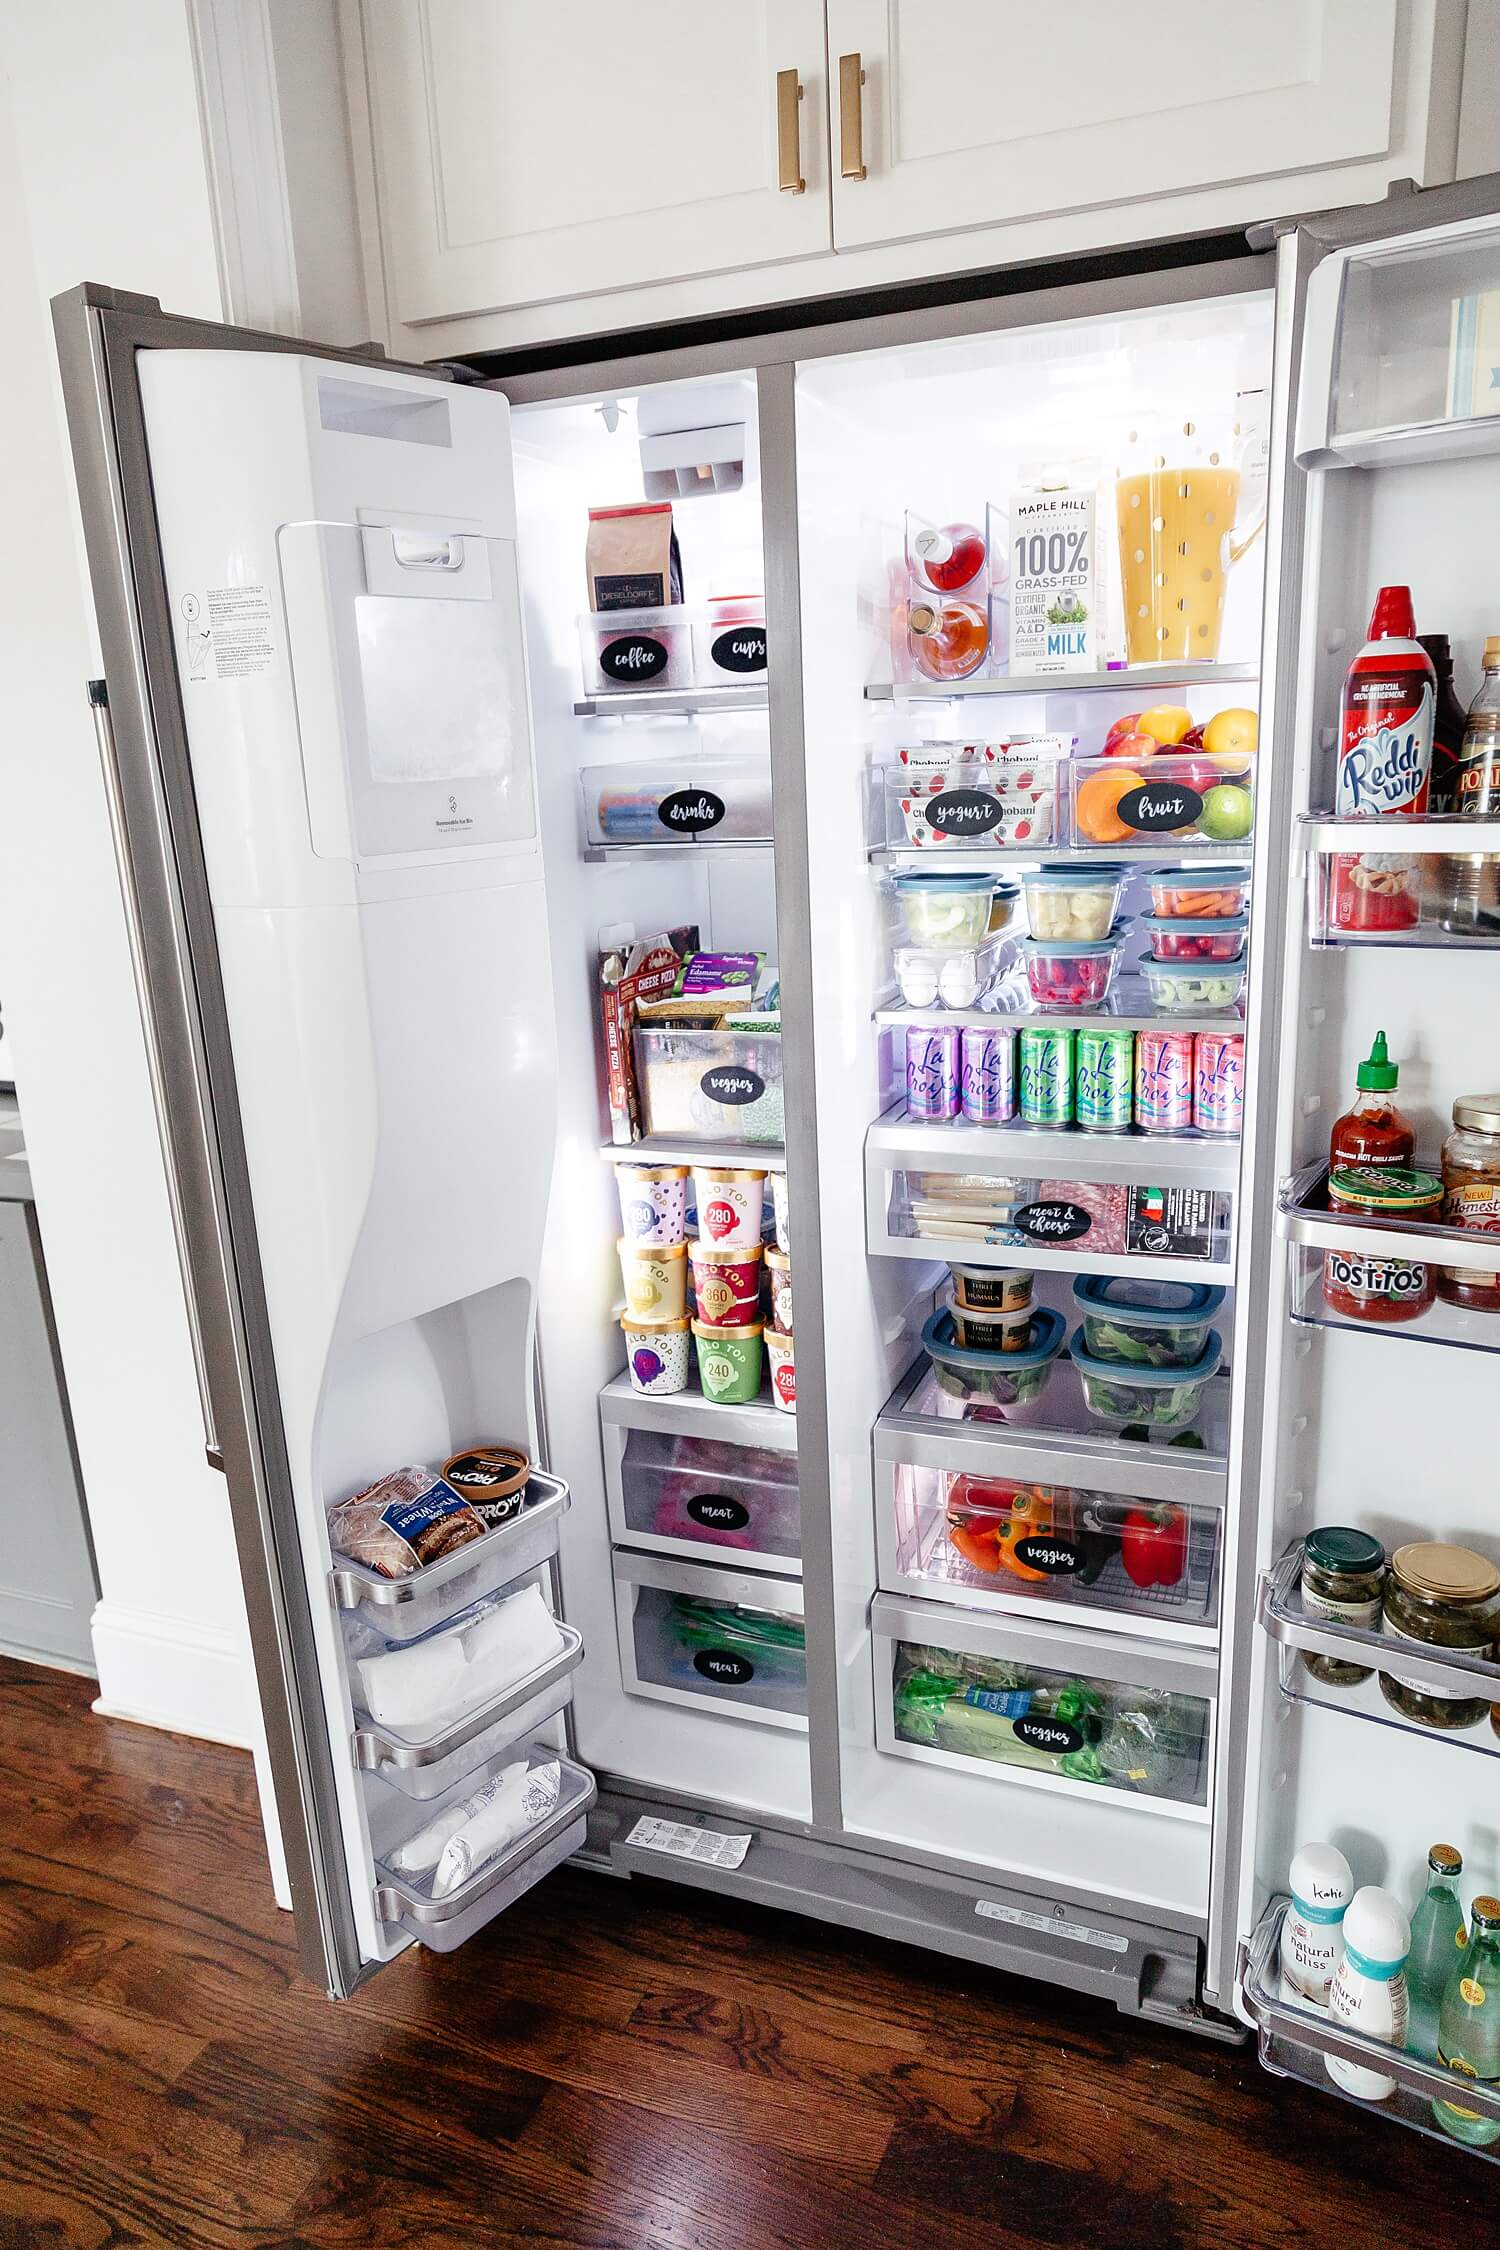 How to Perfectly Organize Your Fridge - The Bend Magazine